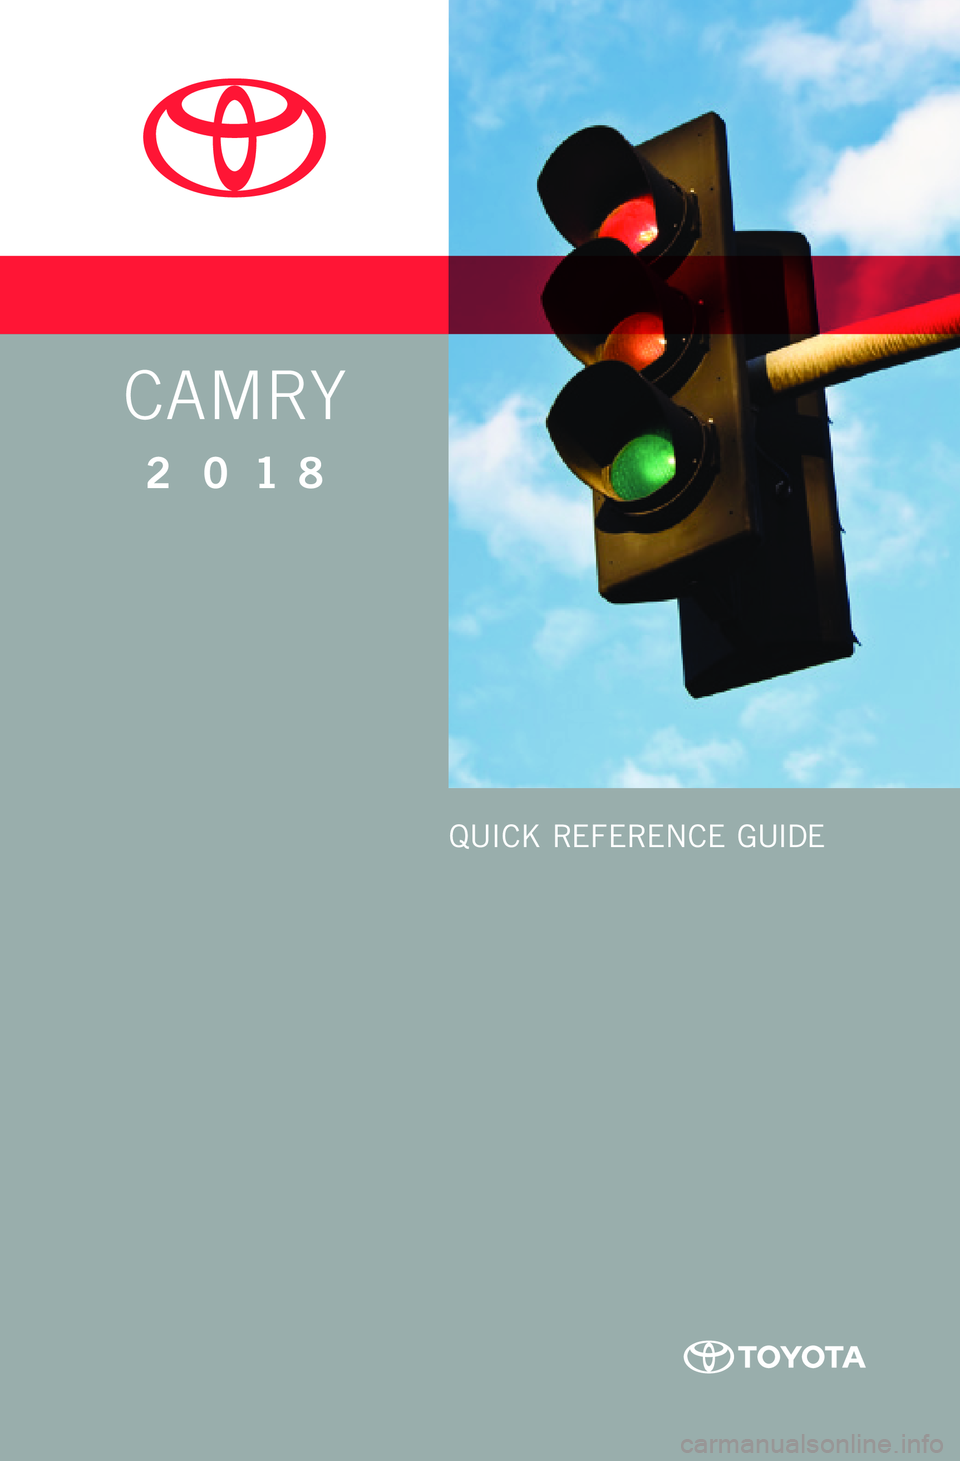 TOYOTA CAMRY 2018  Owners Manual (in English) CAMRY
2 0 18
QUICK REFERENCE GUIDE  